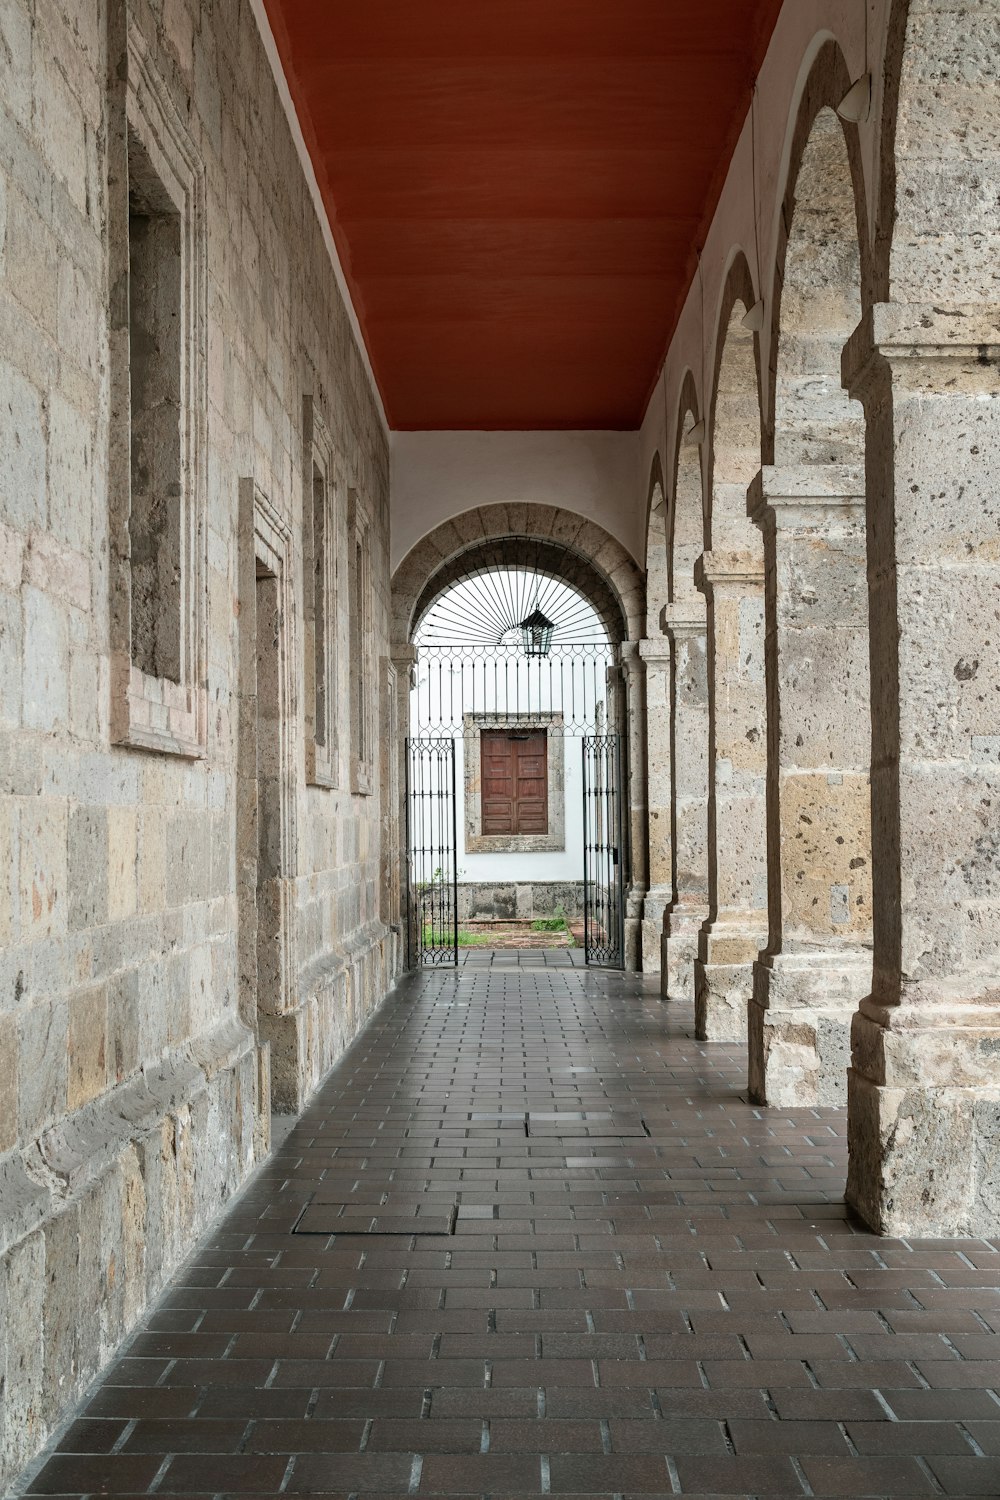 a brick walkway with arches and a clock on the wall